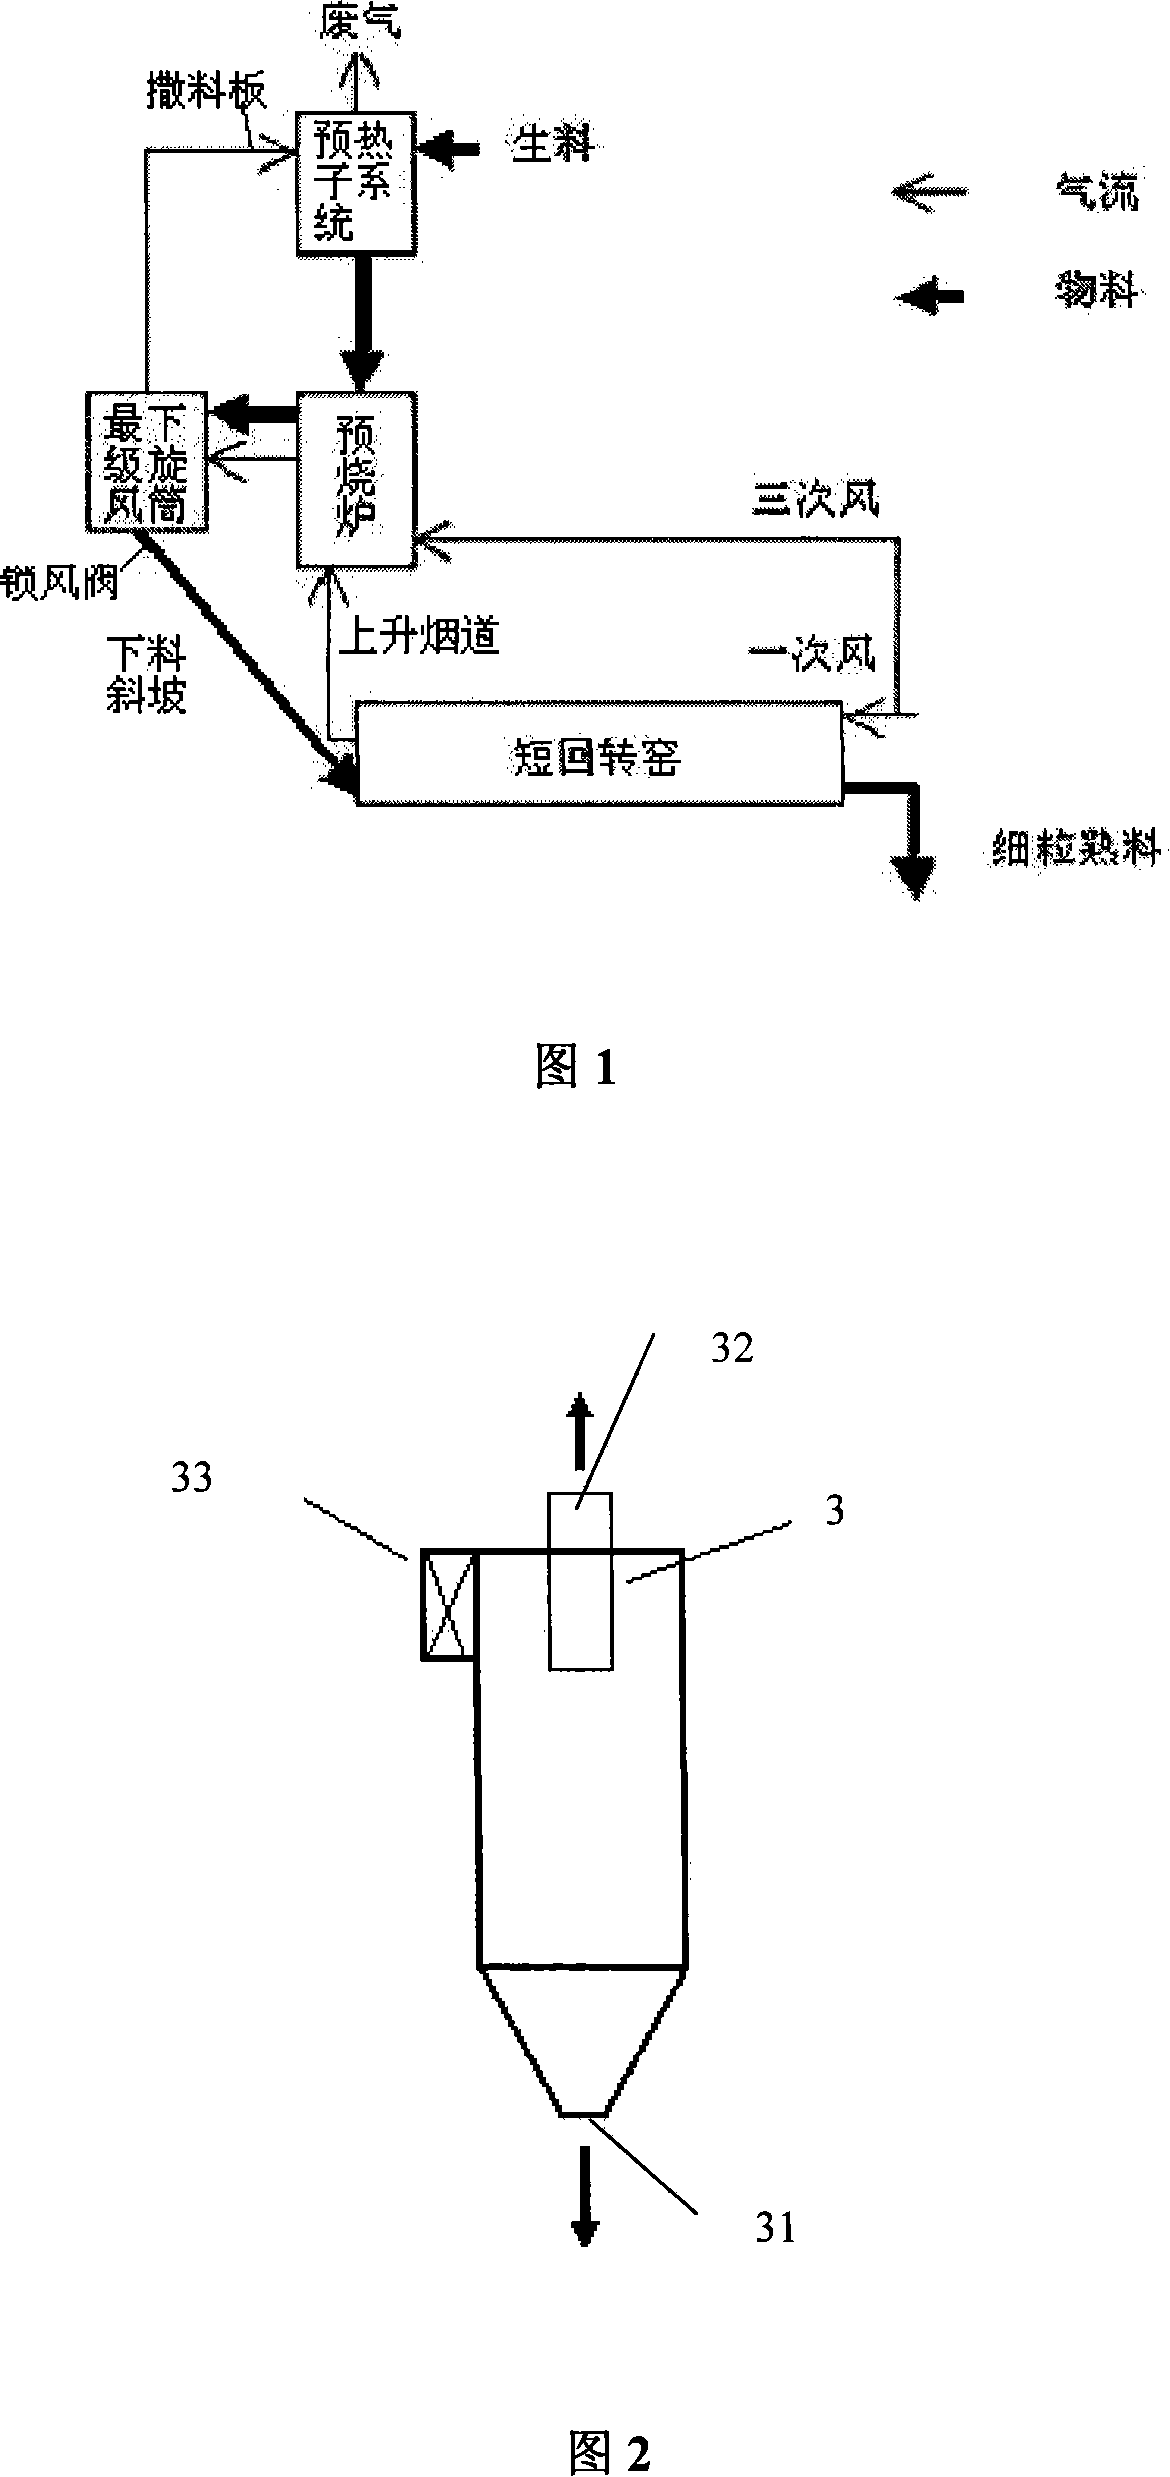 Cement presintering production method and system